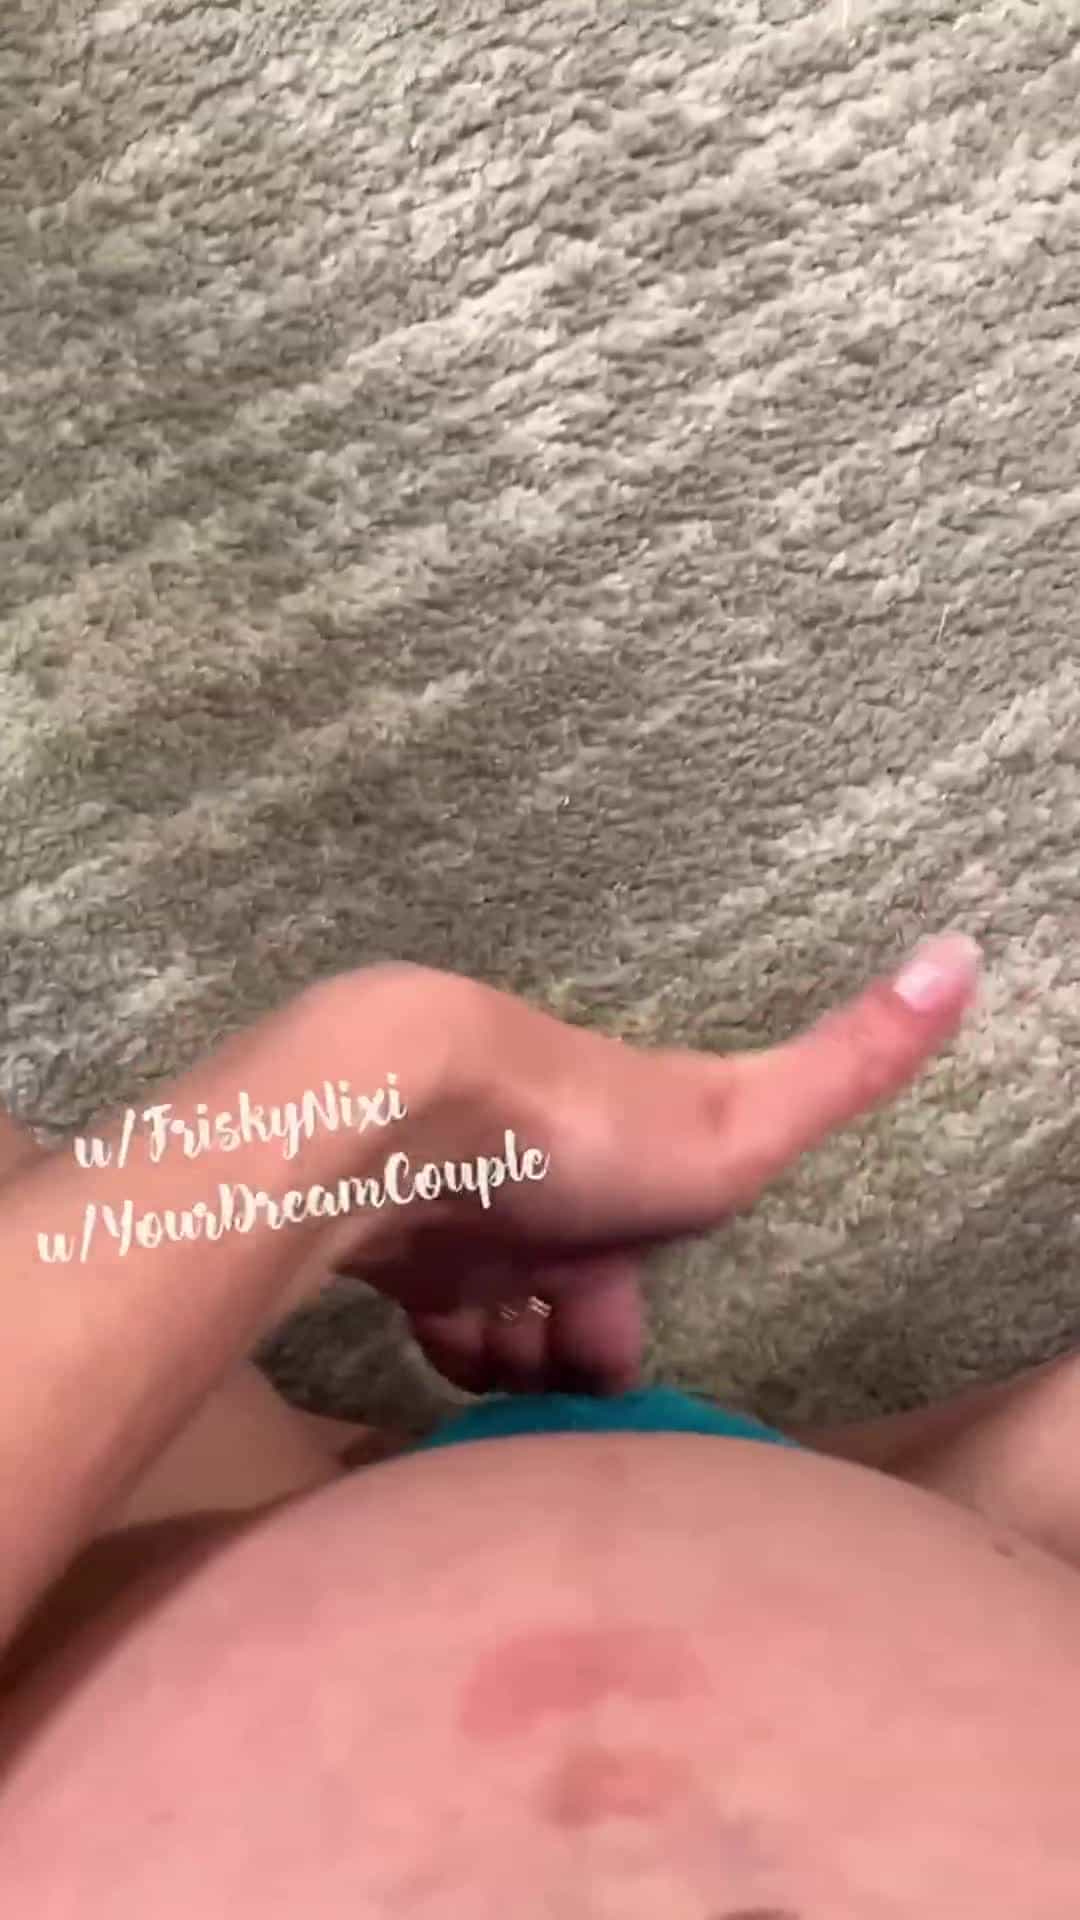 When I was pregnant I loved getting myself off watching him make another woman cum